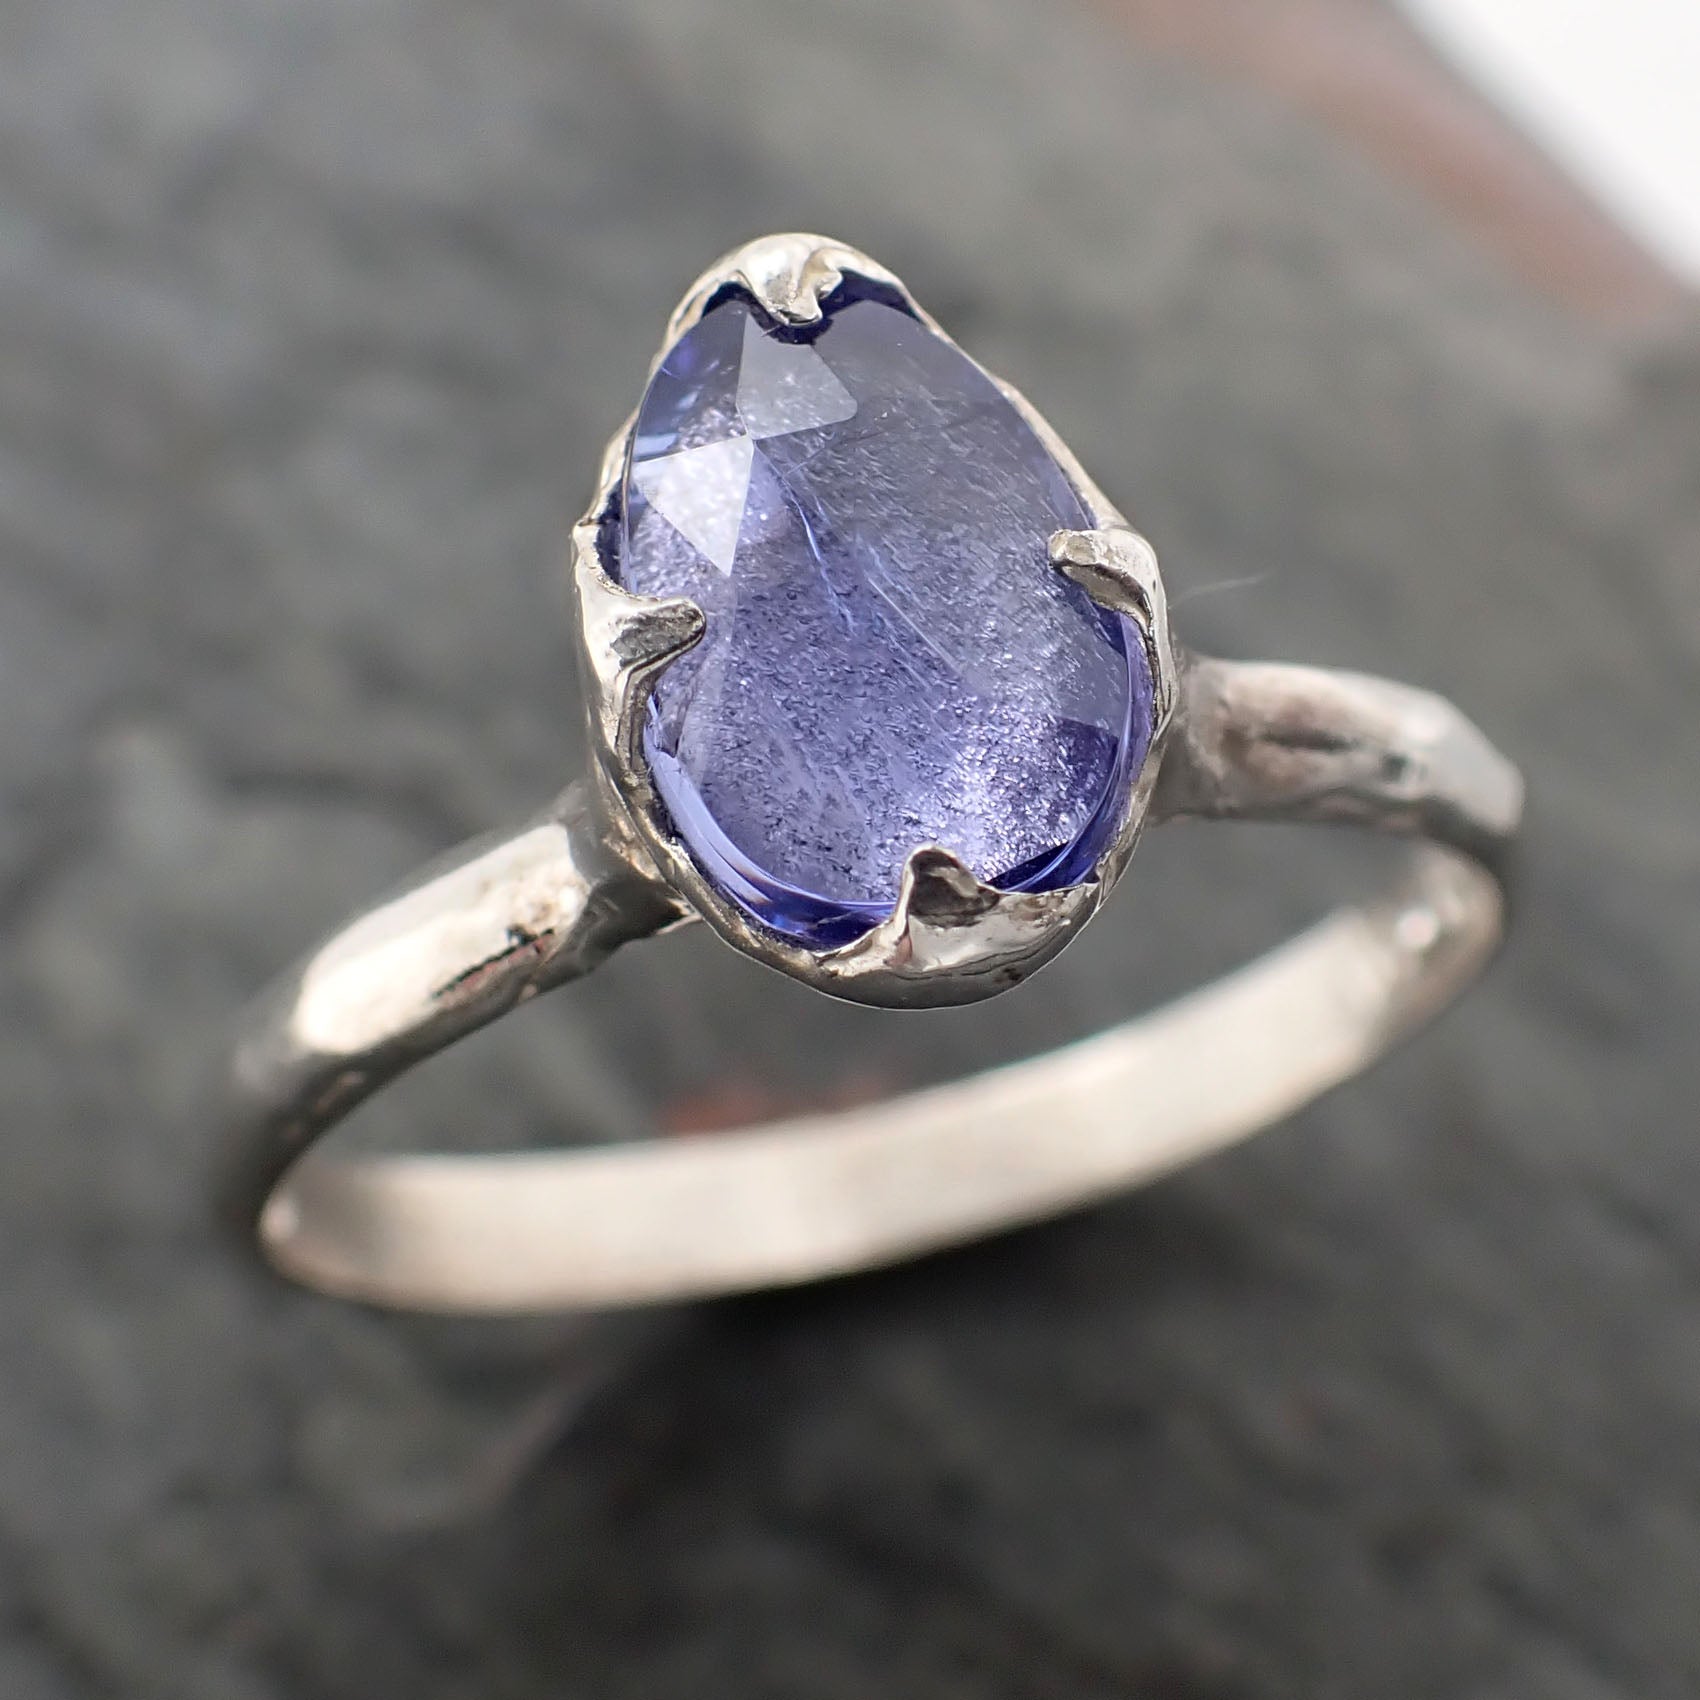 fancy cut tanzanite sterling silver ring gemstone solitaire recycled statement ss00080 Alternative Engagement